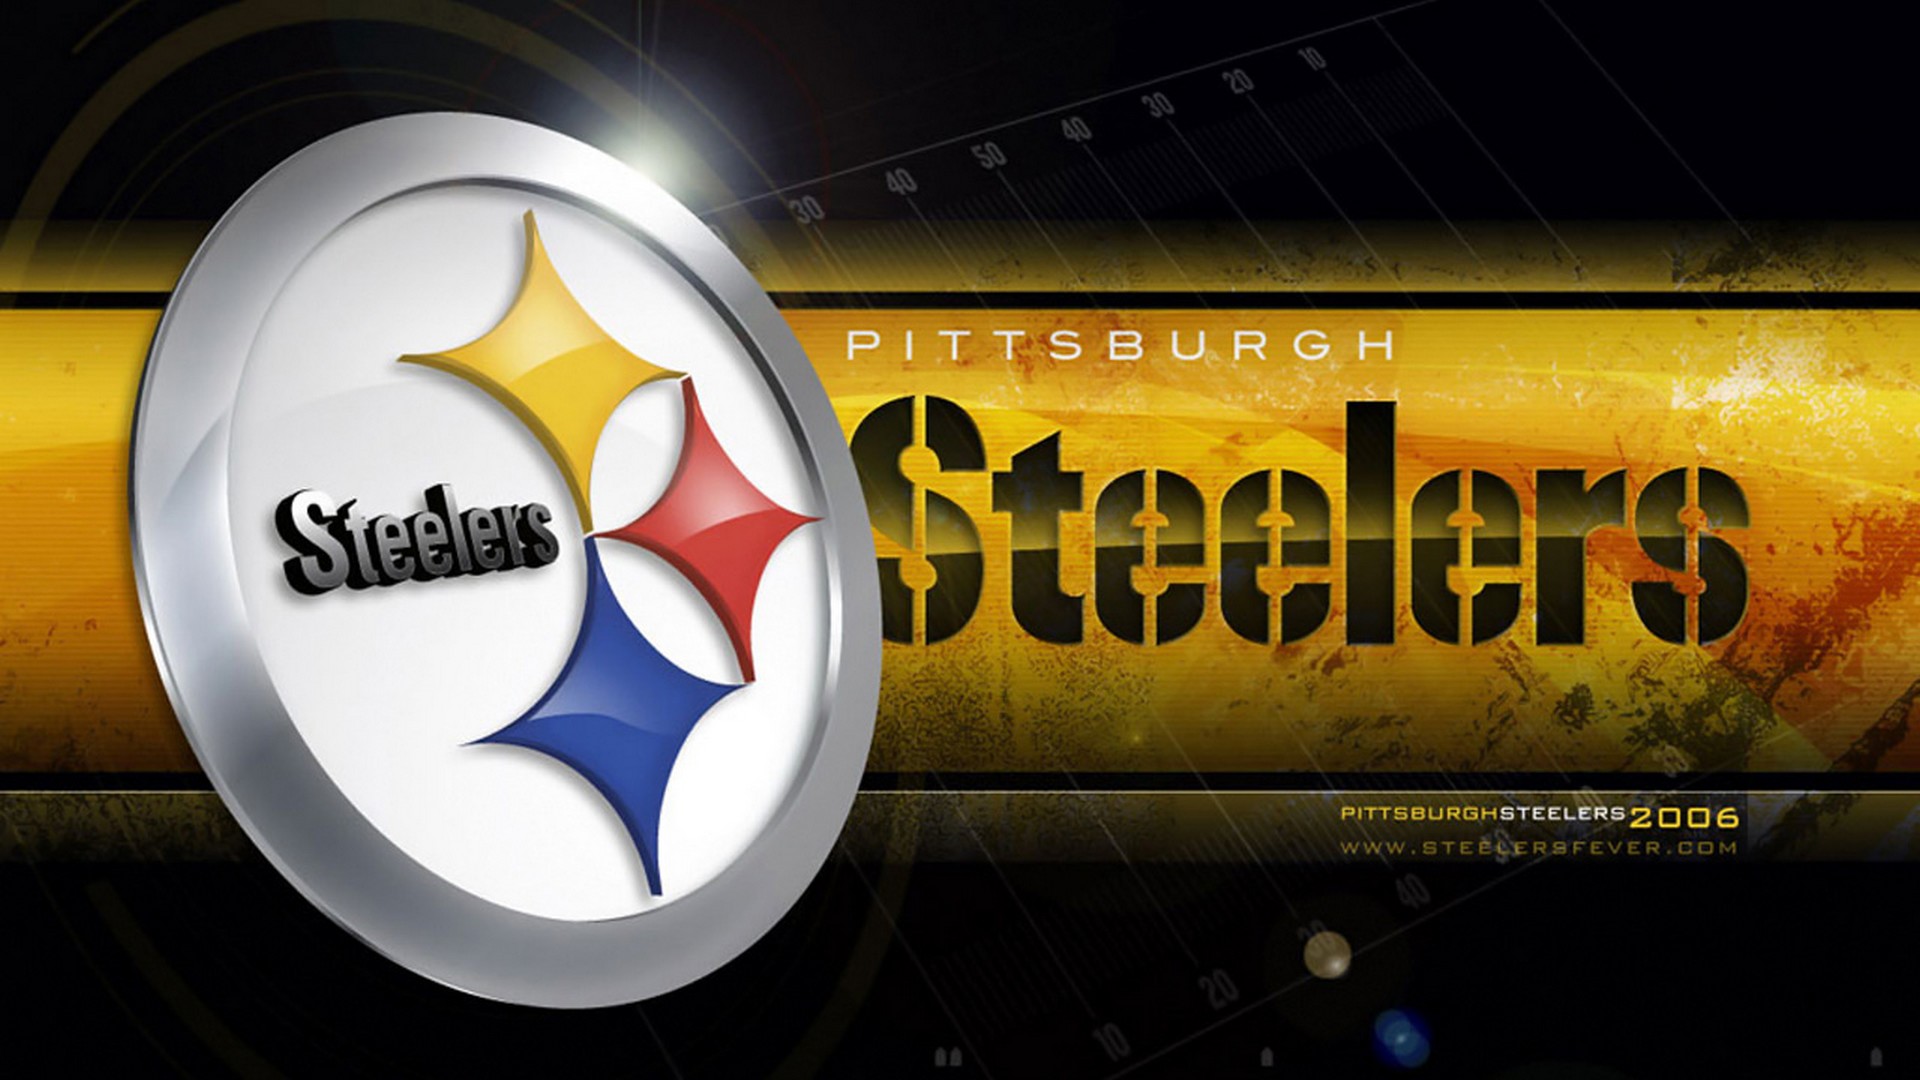 Steelers Logo Wallpaper For Mac Backgrounds with resolution 1920x1080 pixel. You can make this wallpaper for your Mac or Windows Desktop Background, iPhone, Android or Tablet and another Smartphone device